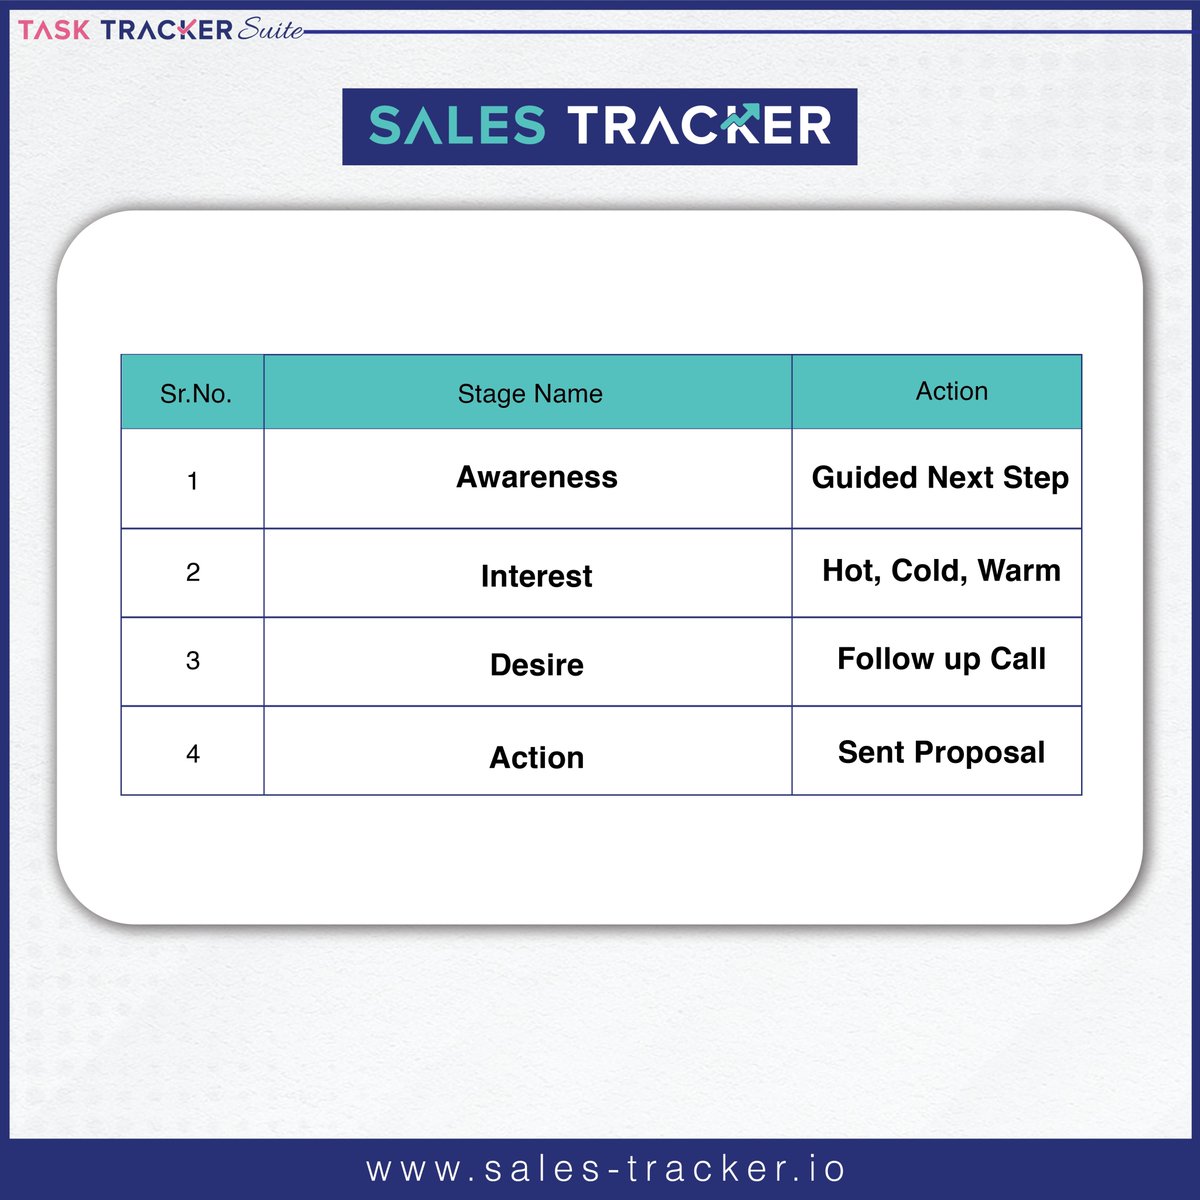 A sales funnel consists of 4 stages: Awareness, Interest, Desire and Action

Sales Tracker helps you to optimize sales funnel through its features, try it now!

Signup Now: bit.ly/3JiLTSm

#salestracker #salesfunnel #salemanagement #sales #boostsales #salesmanagementtool